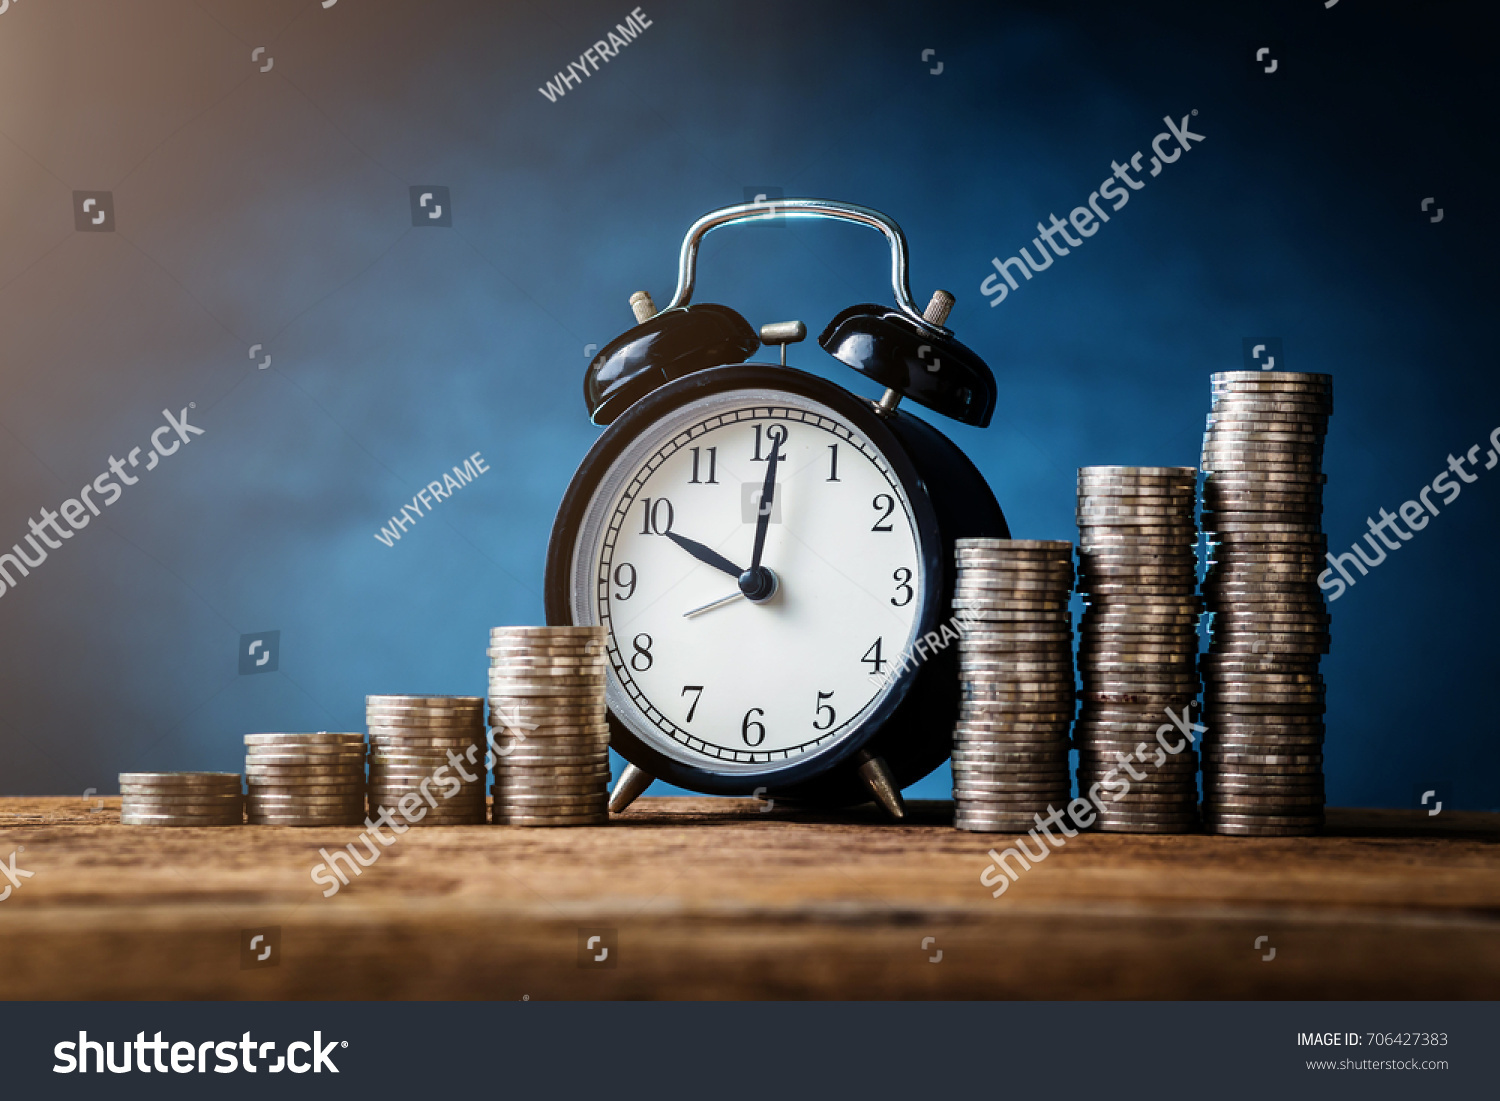 business financial ideas concept with coins stack and alarmclock isolate background with free copyspace for your creativity ideas text #706427383